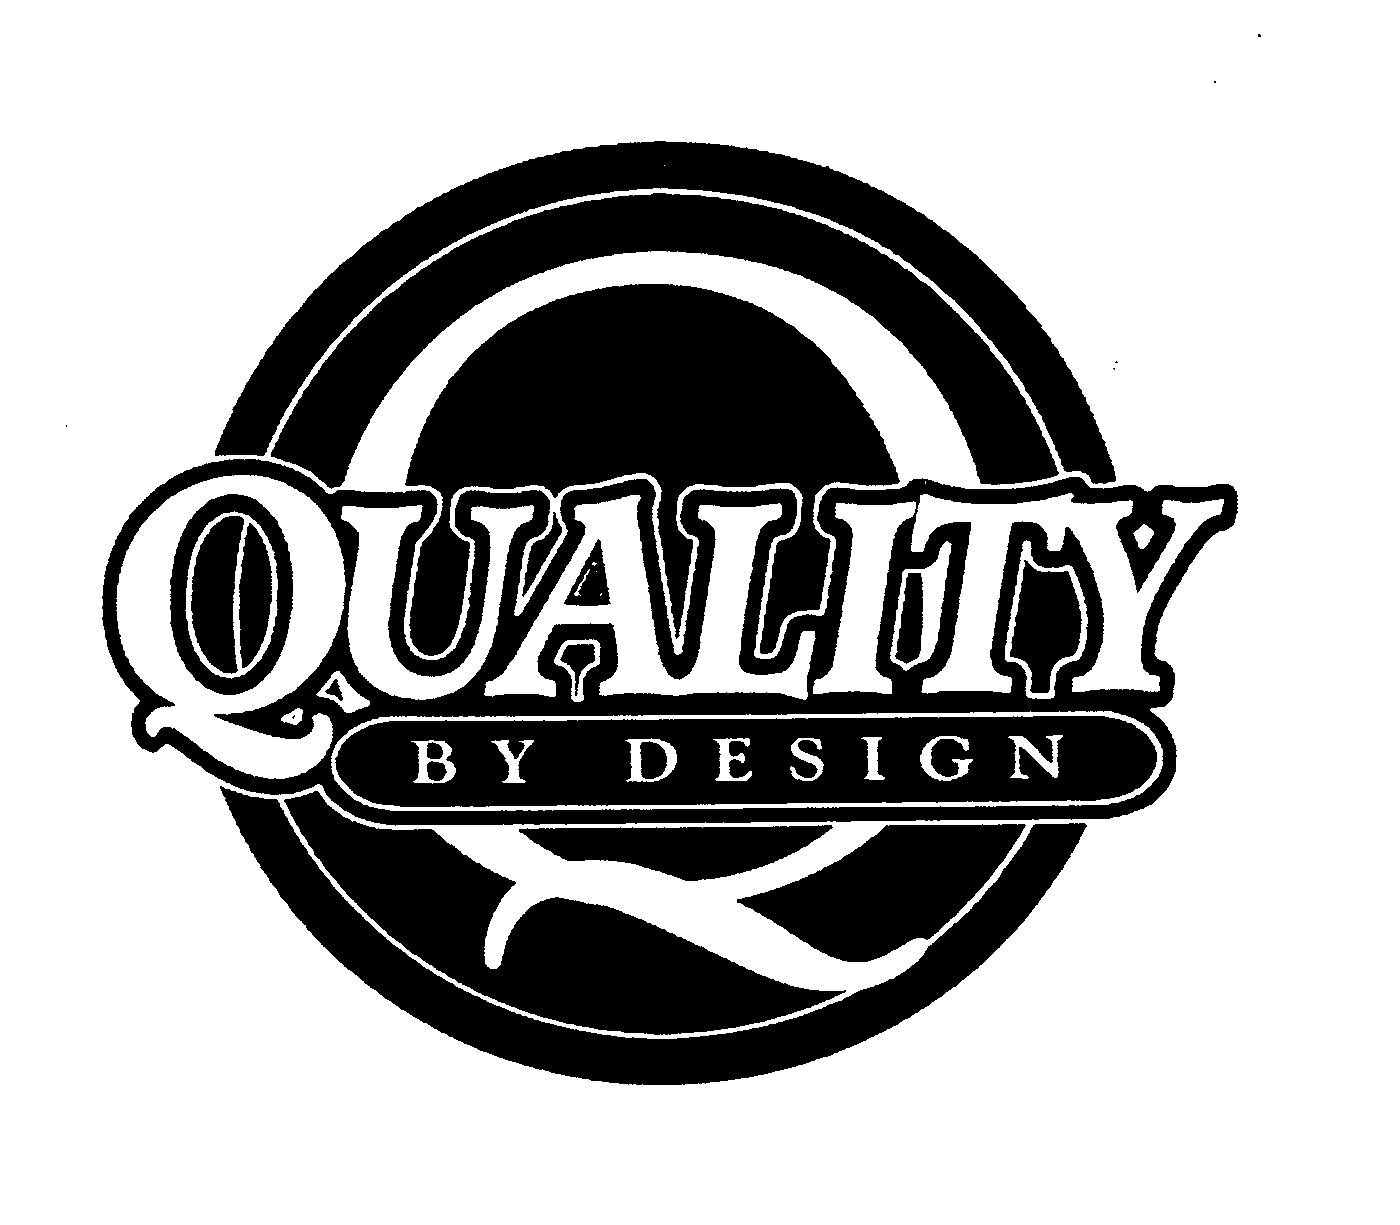 QUALITY BY DESIGN